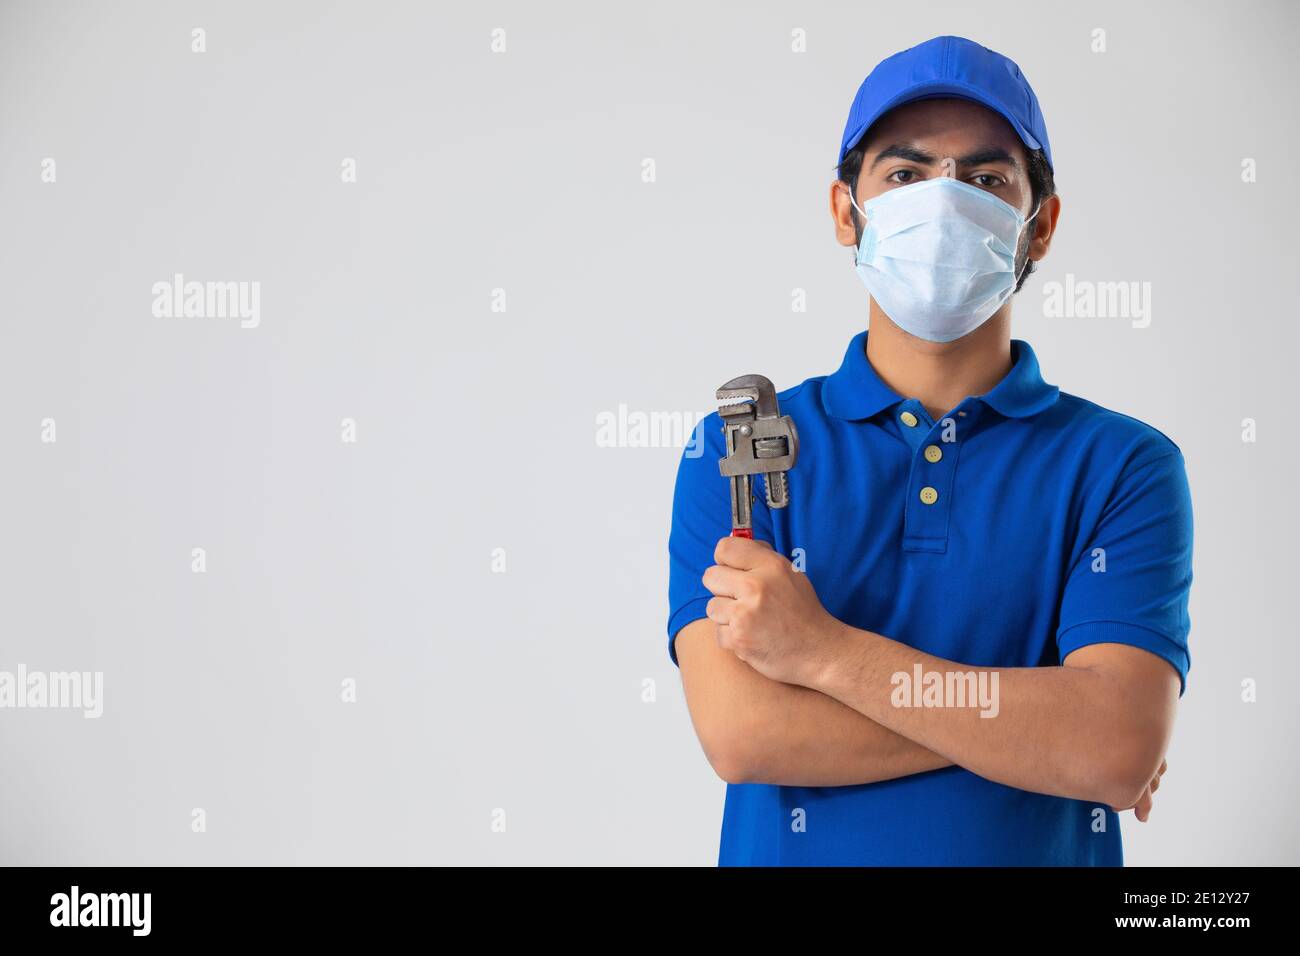 A PLUMBER WEARING FACE MASK HOLDING TOOL AND LOOKING AT CAMERA Stock Photo